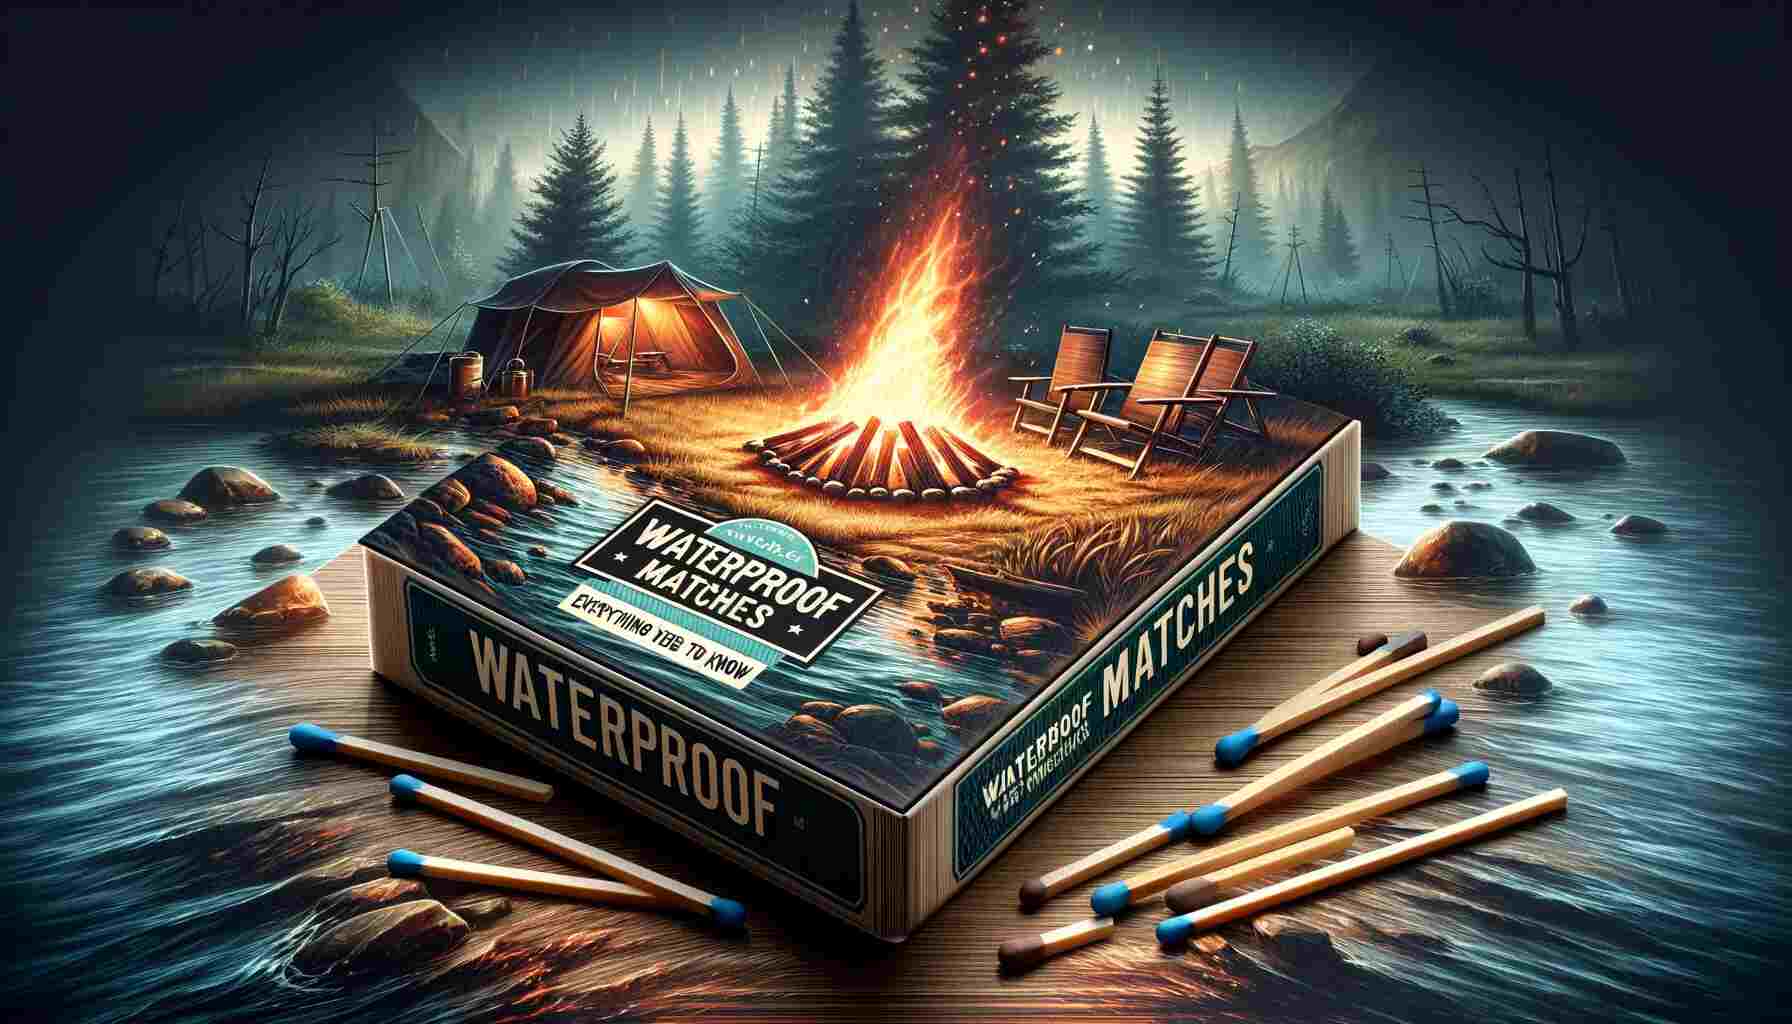 Here is the featured image for the article "Waterproof Matches: Everything You Need to Know." It features a box of waterproof matches set against a rugged, outdoor backdrop, highlighting their utility in wilderness settings. The image also includes elements of a camping environment to emphasize the context in which these matches are used.